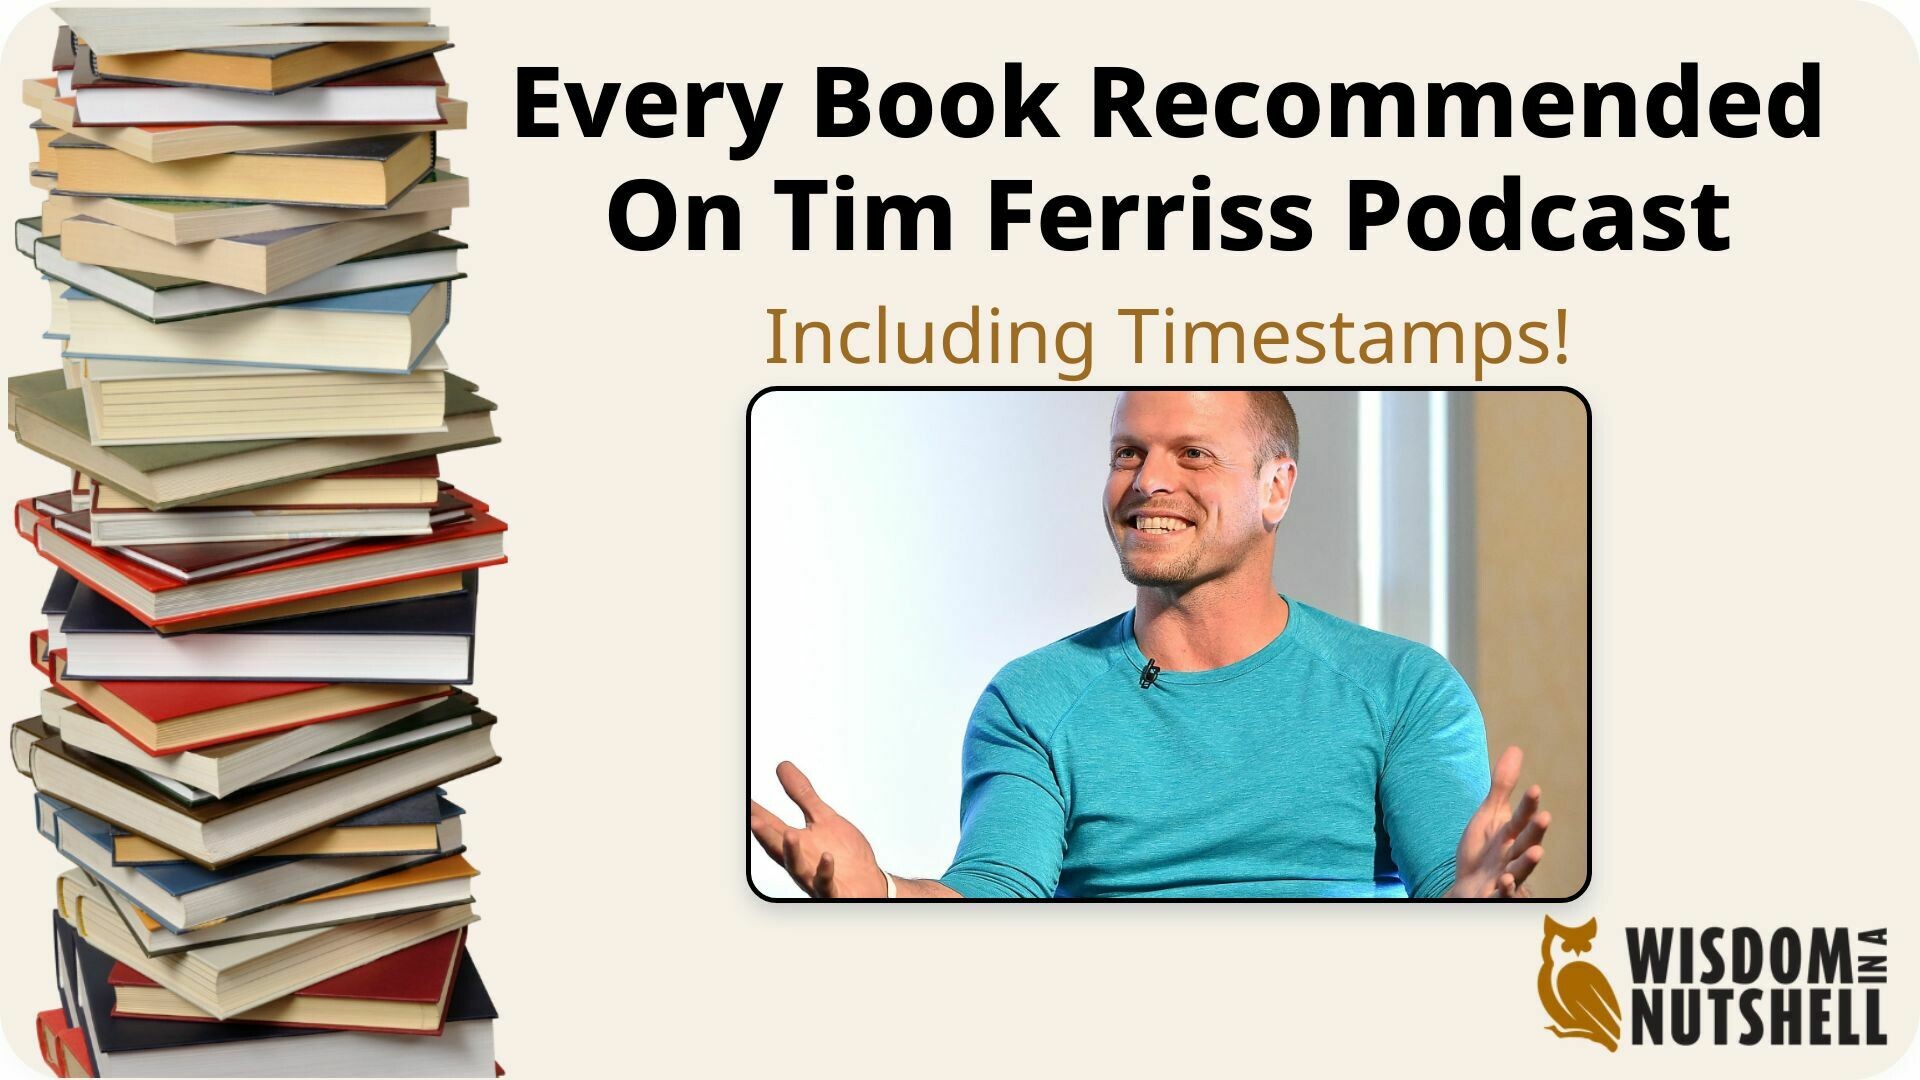 Every Book Recommended on the Tim Ferriss Podcast